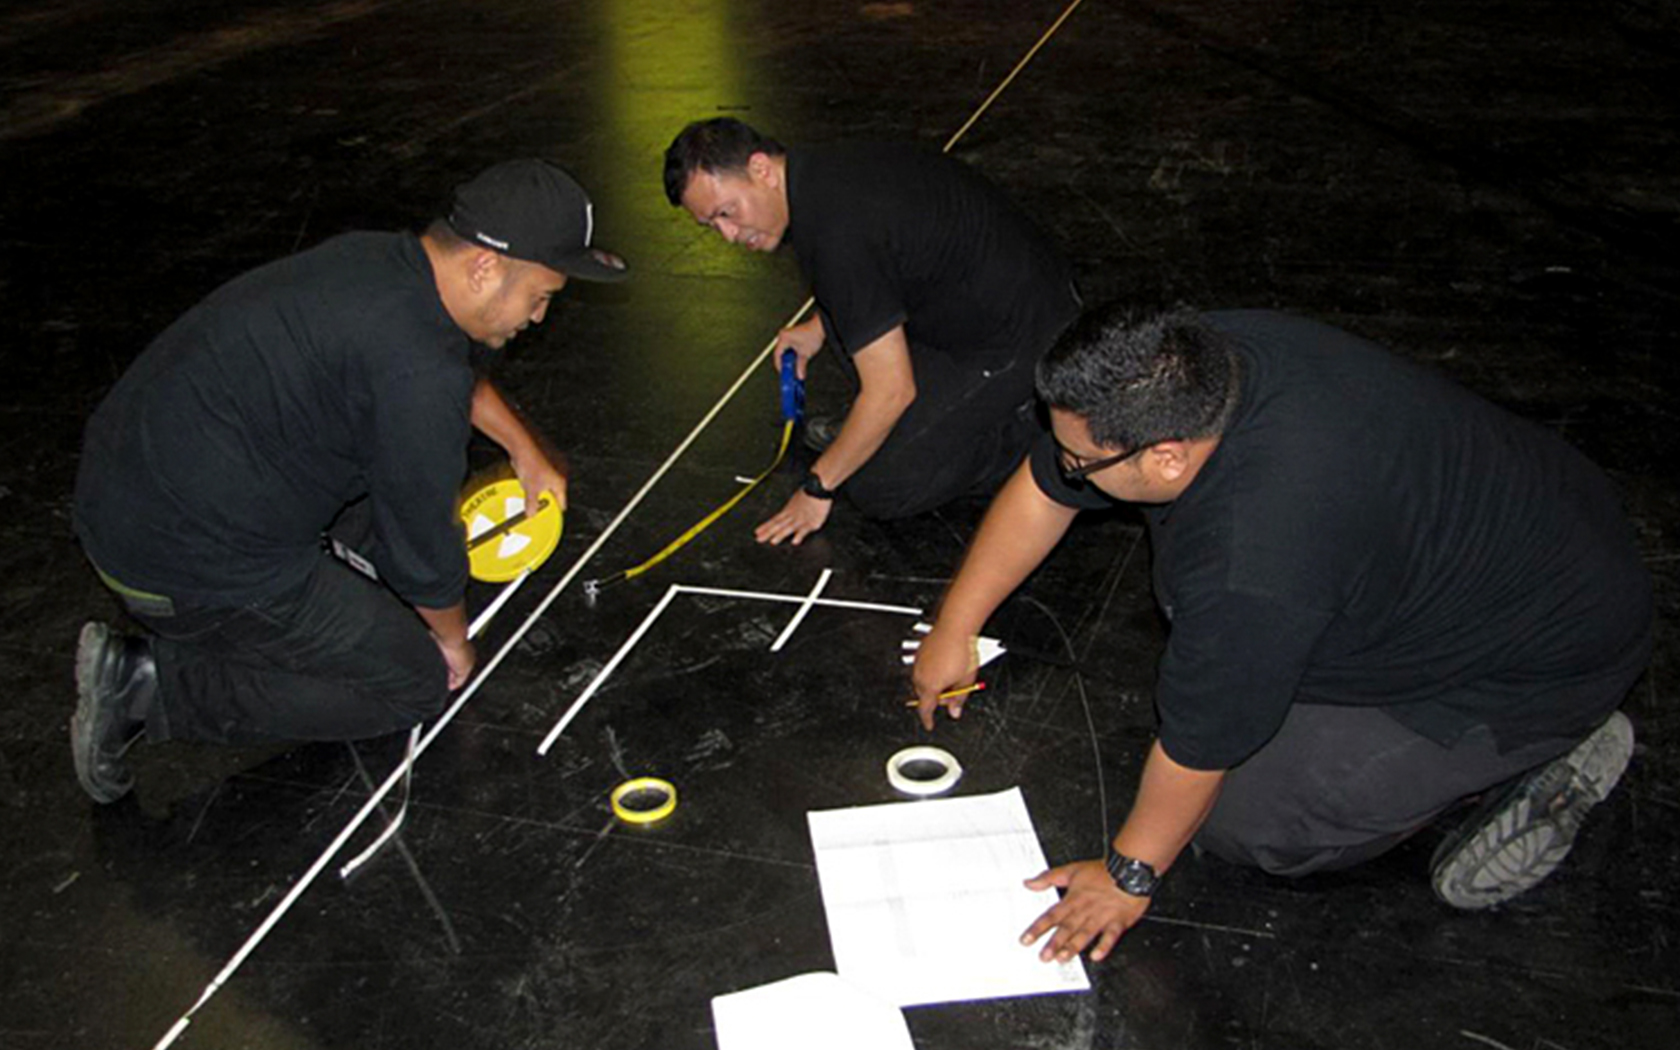 An image of three men marking the stage